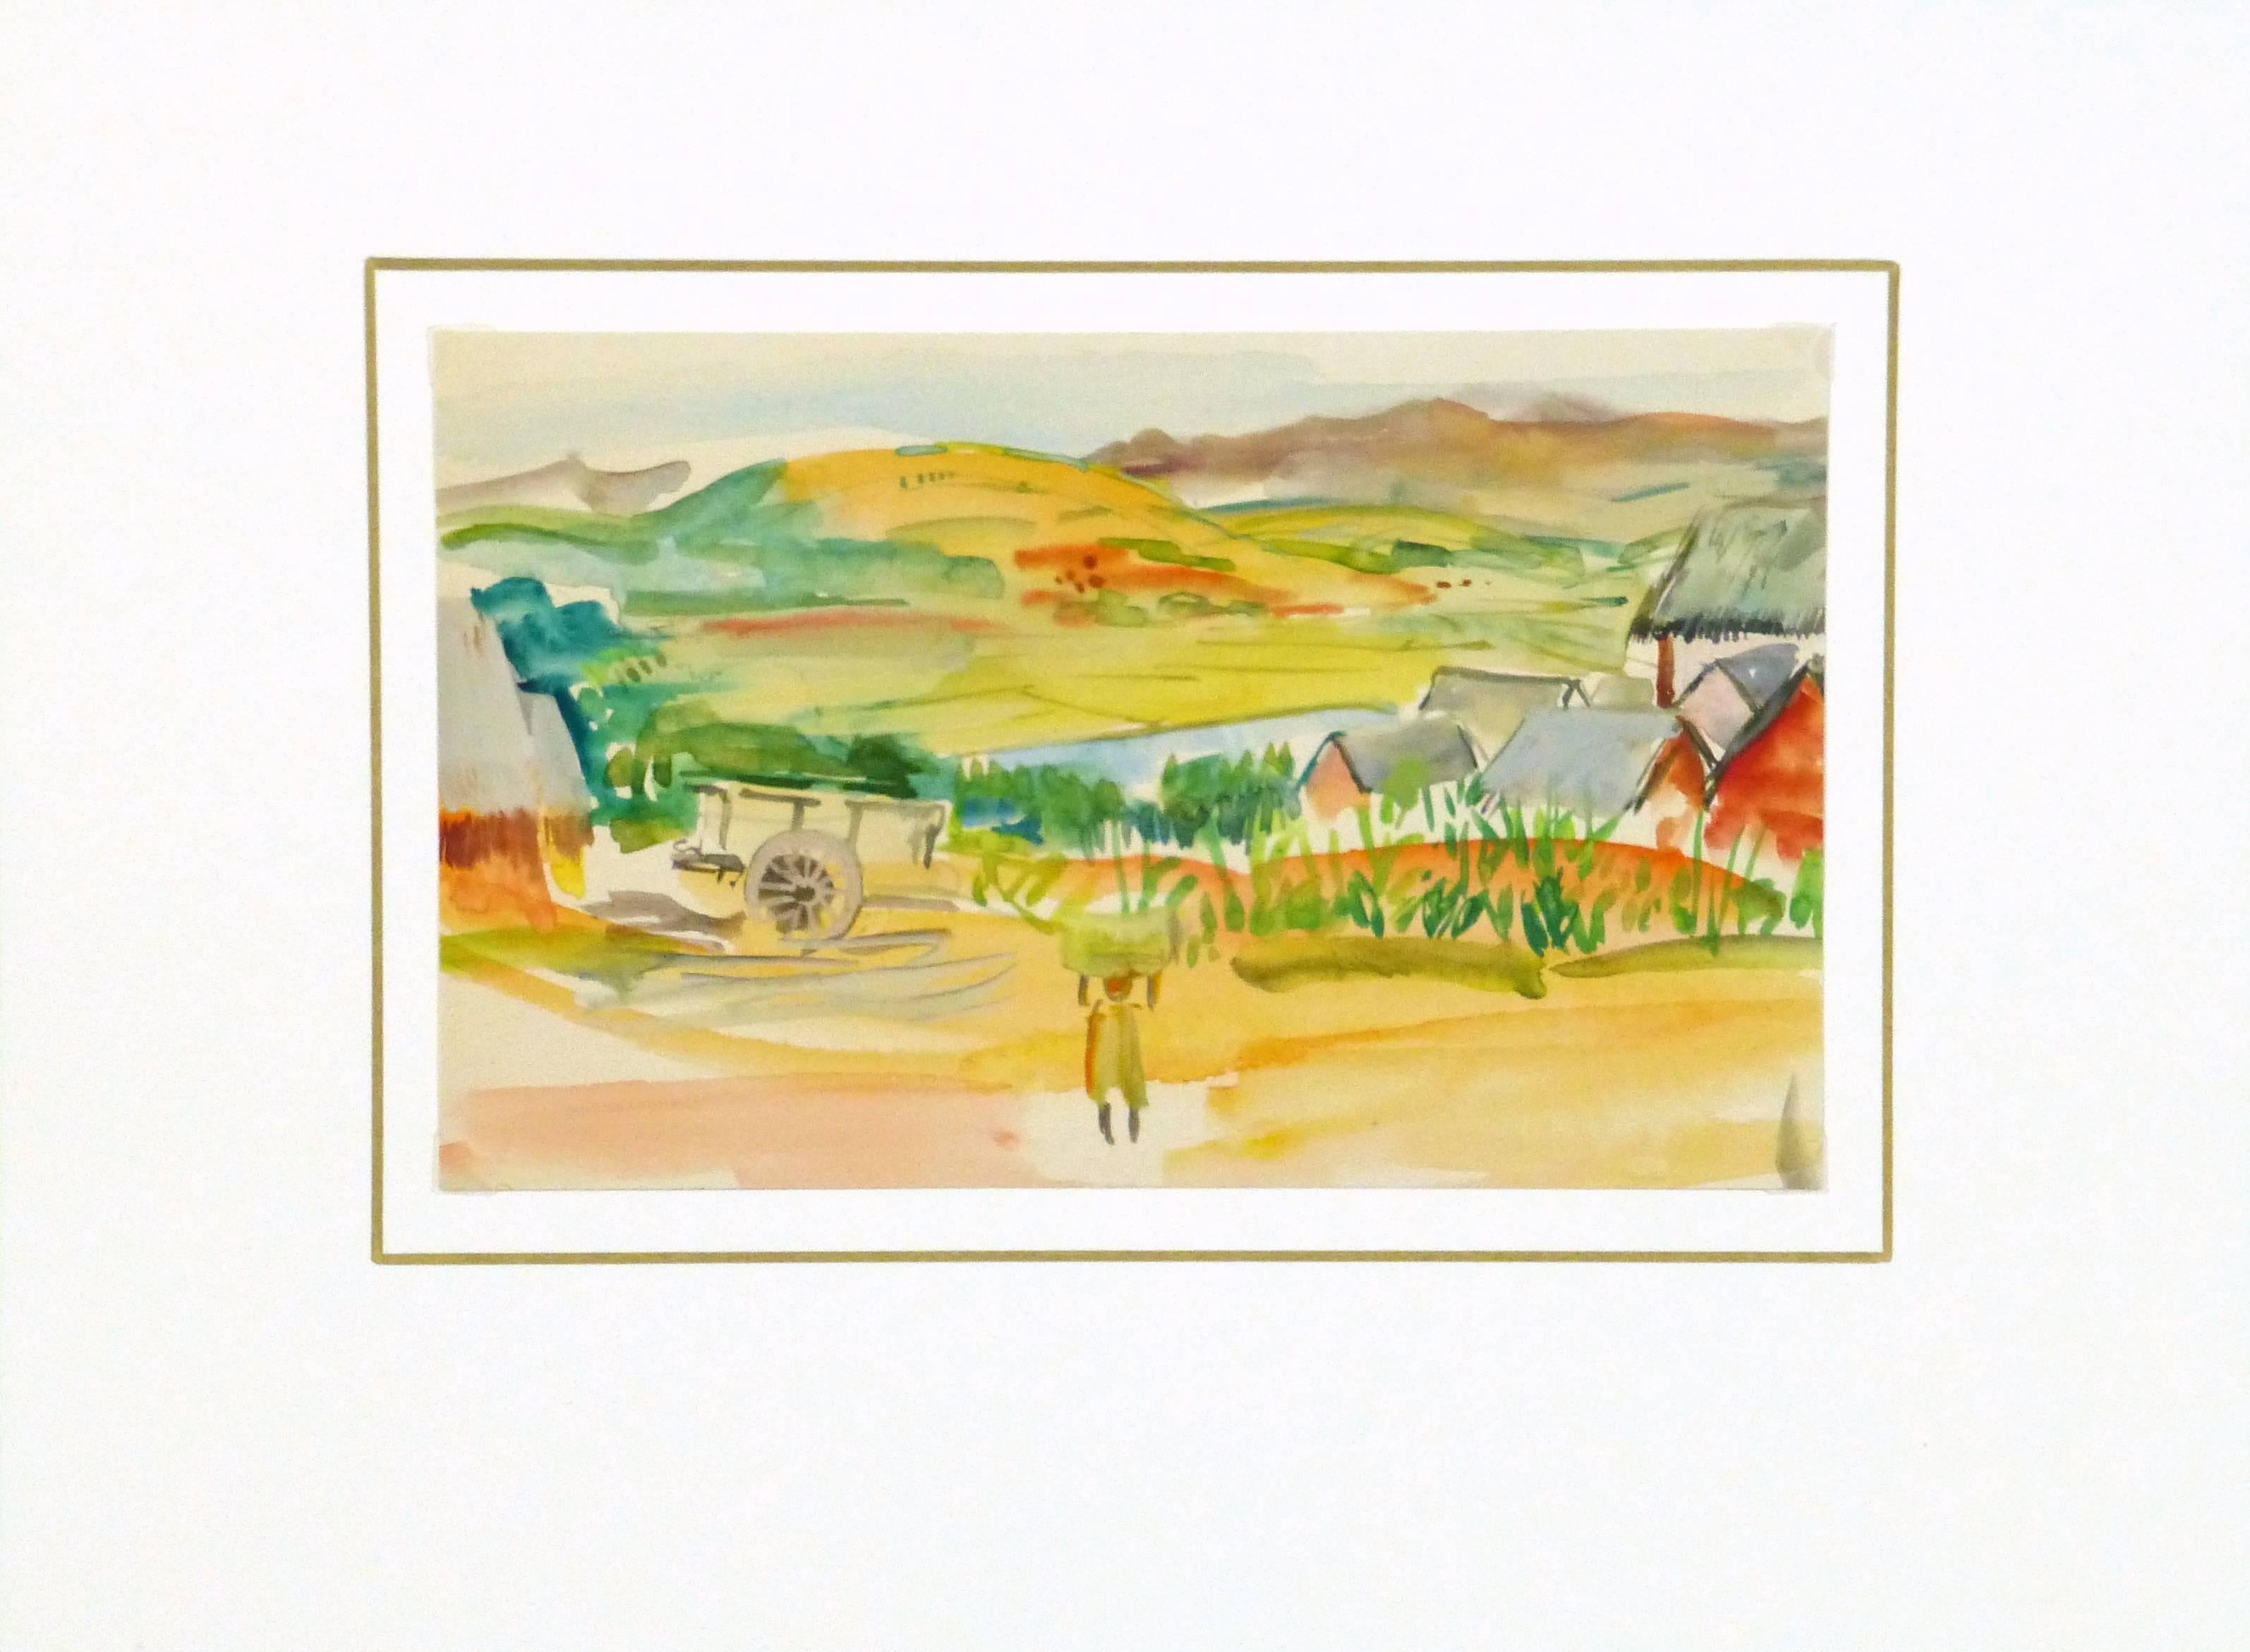 Brightly hued watercolor of a the rural farmlands of Madagascar Islands by French artist Stephane Magnard, circa 1950. 

Original one-of-a-kind artwork on paper displayed on a white mat with a gold border. Mat fits a standard-size frame. Archival